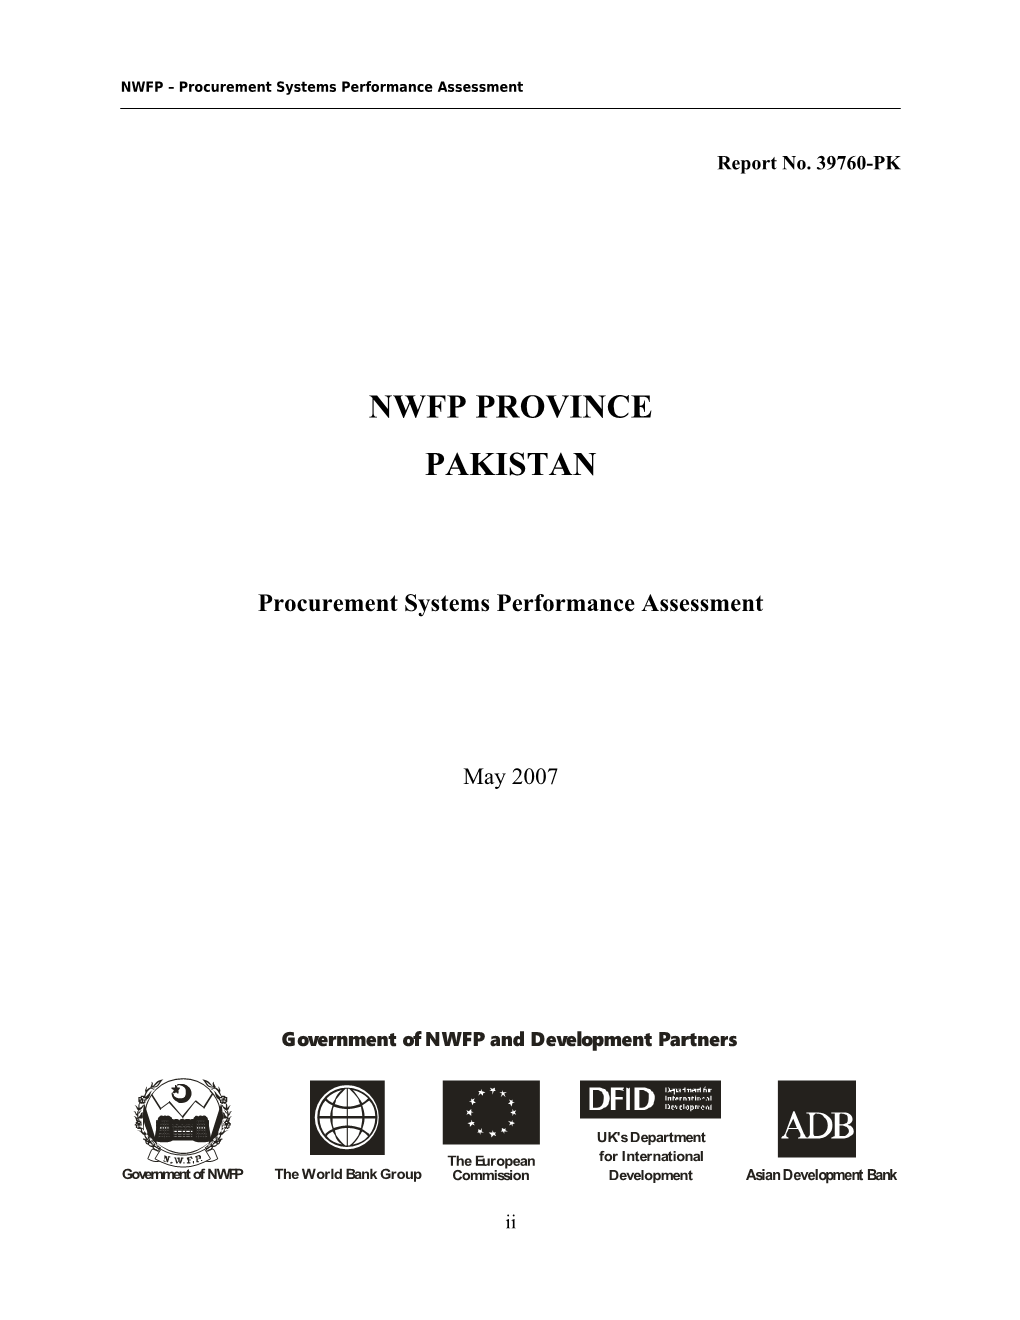 PROCUREMENT SYSTEMS ASSESSMENT for the PROVINCE of BALOCHISTAN World Bank Assisted